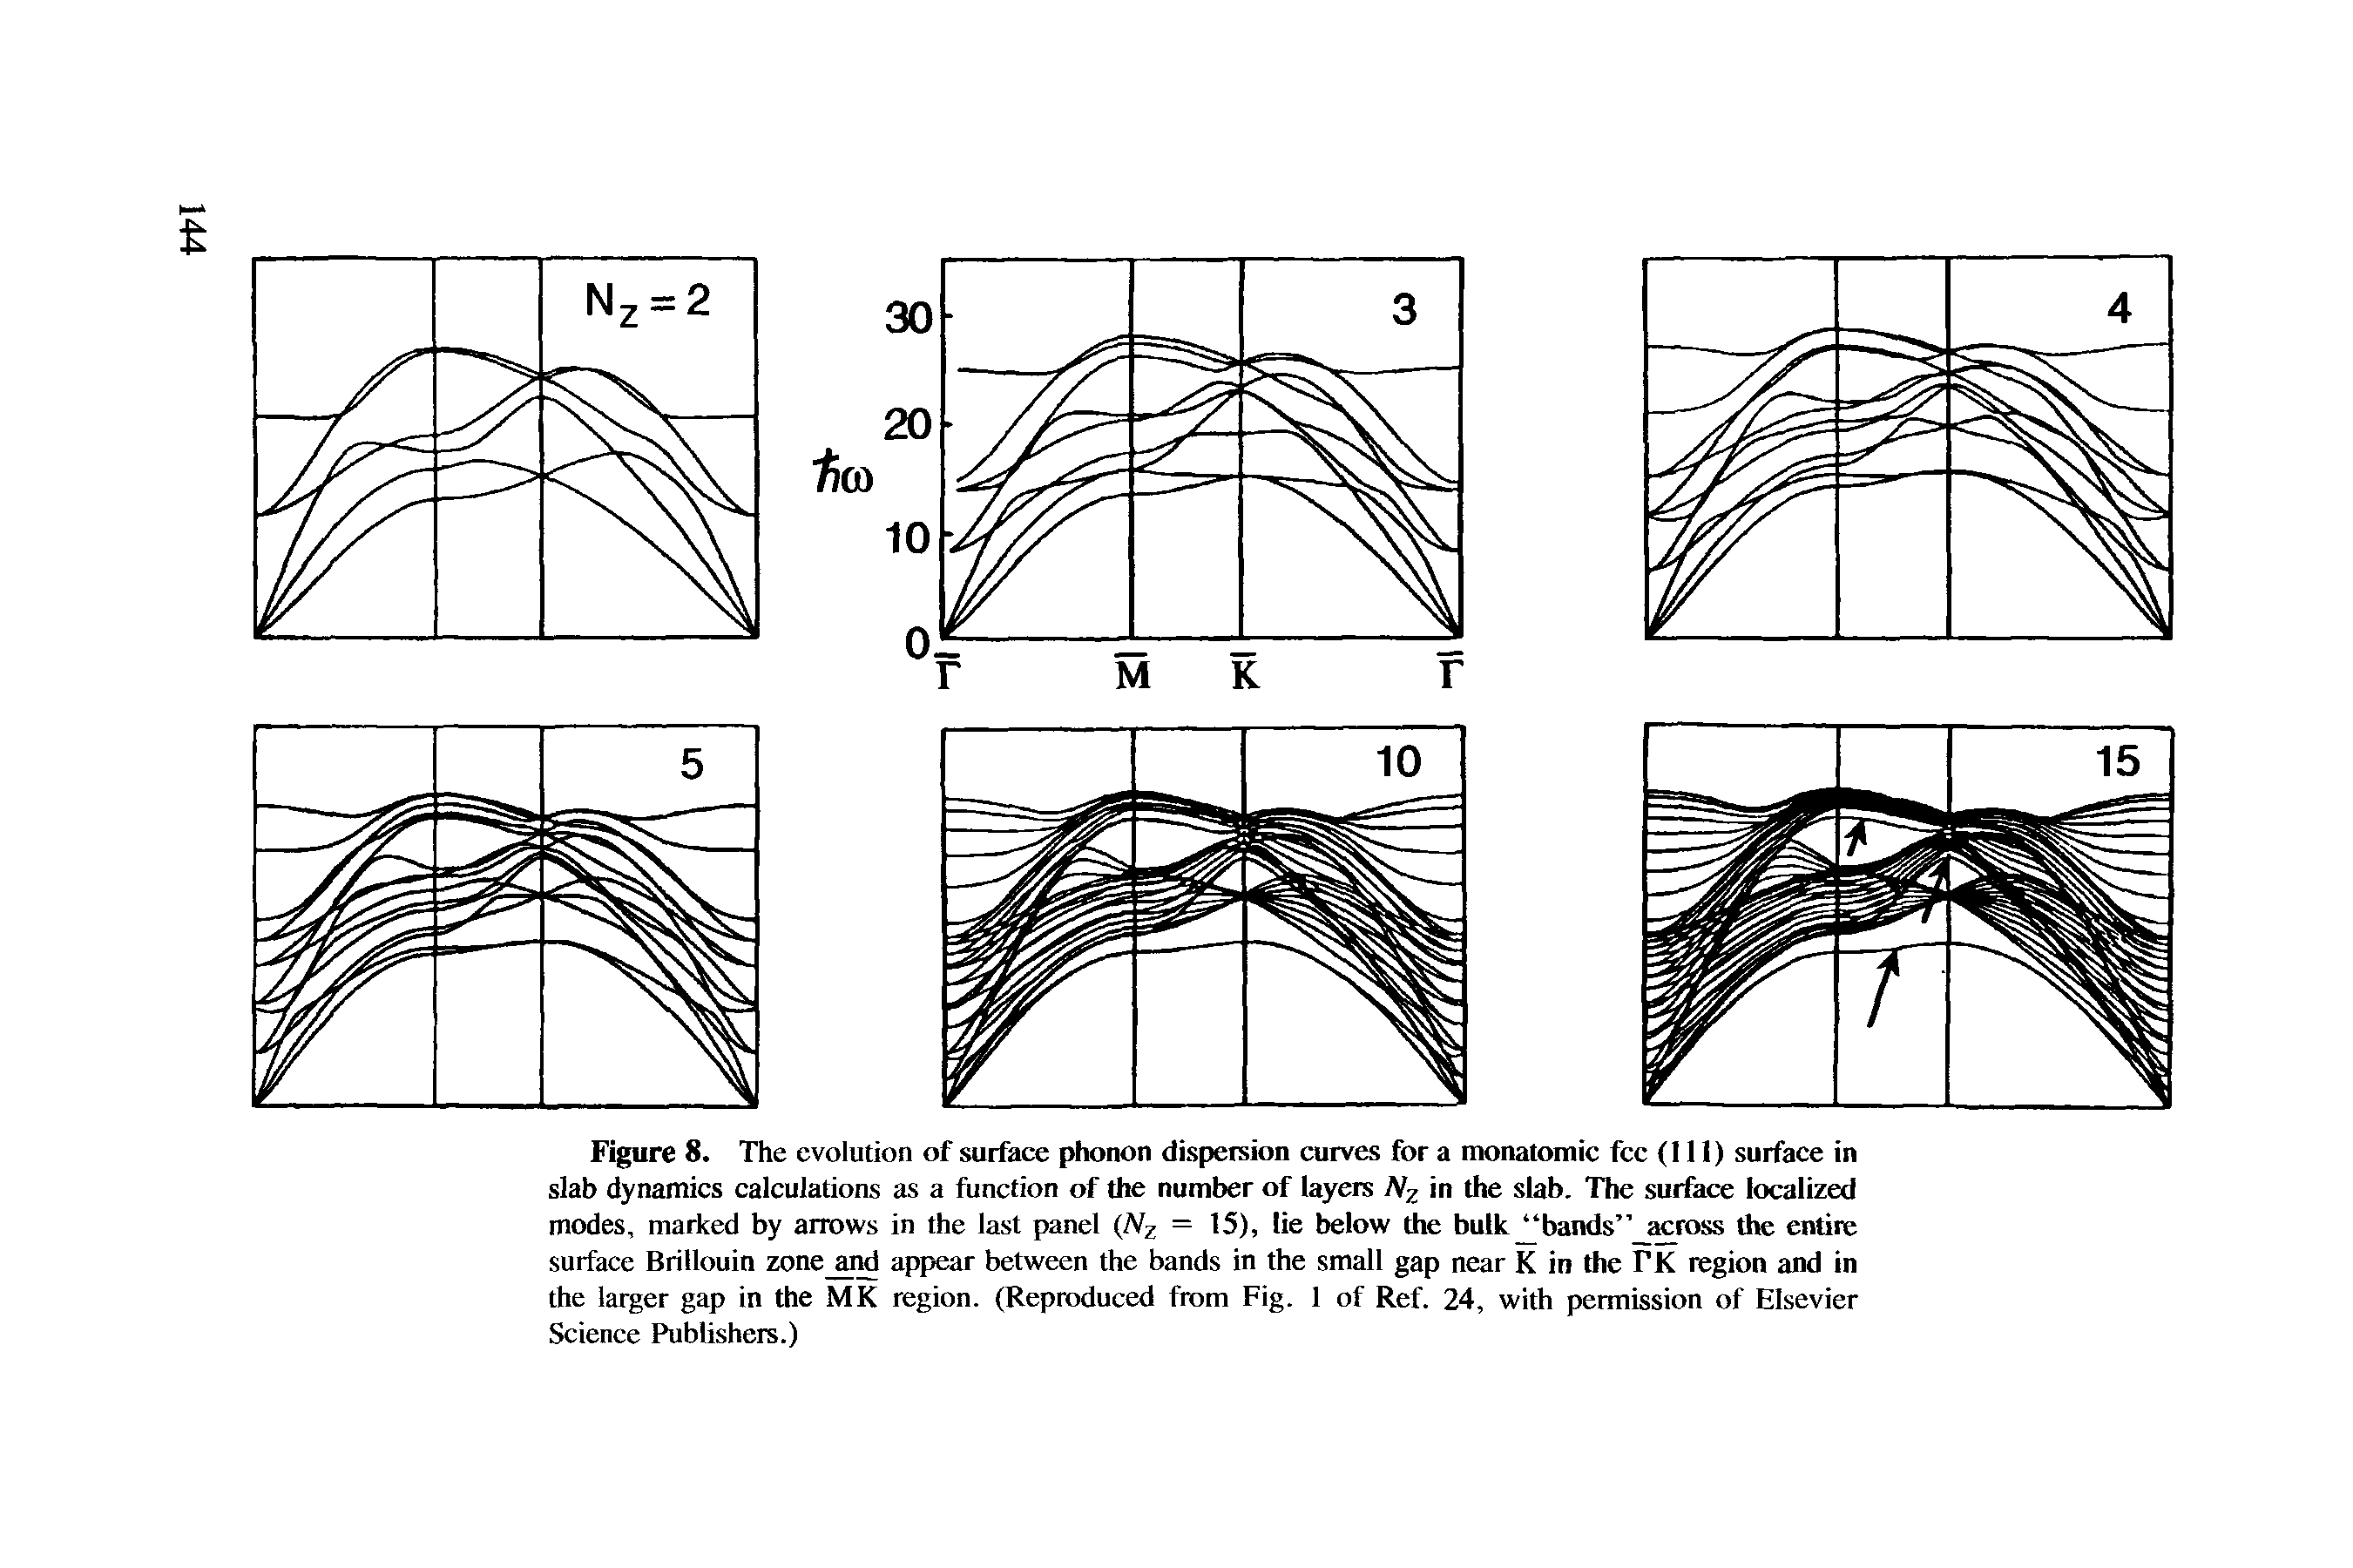 Figure 8. The evolution of surface phonon dispersion curves for a monatomic fee (111) surface in slab dynamics calculations as a function of the number of layers in the slab. The surface localized modes, marked by arrows in the last panel (iV = 15), lie below the bulk bands Mross the entire surface Brillouin zone and appear between the bands in the small gap near K in the TK region and in the larger gap in the MK region. (Reproduced from Fig. 1 of Ref. 24, with permission of Elsevier Science Publishers.)...